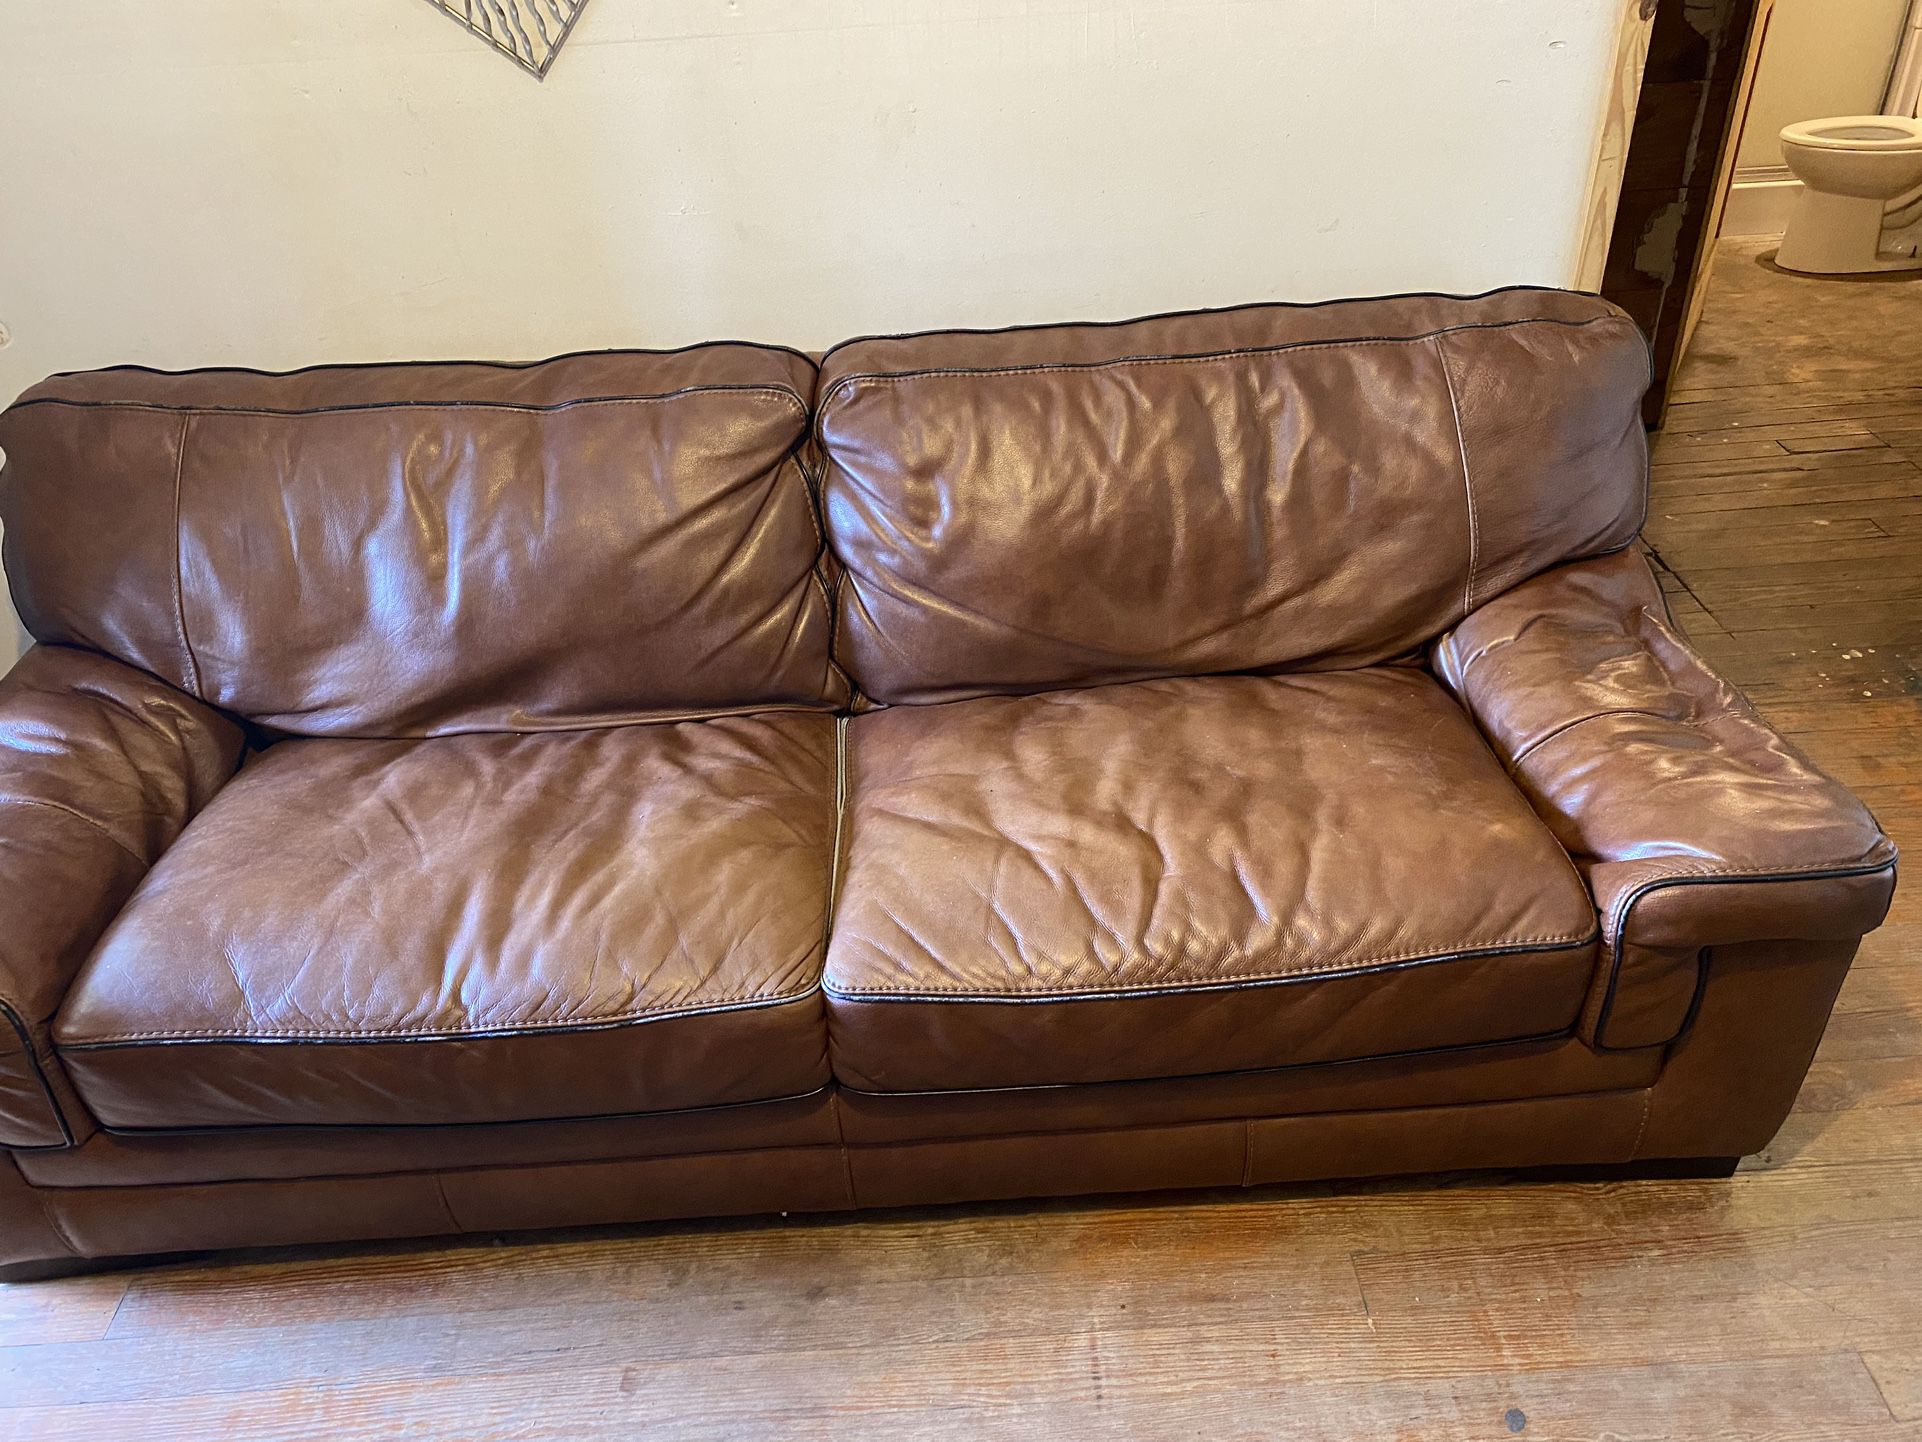 Macy’s Leather Couch